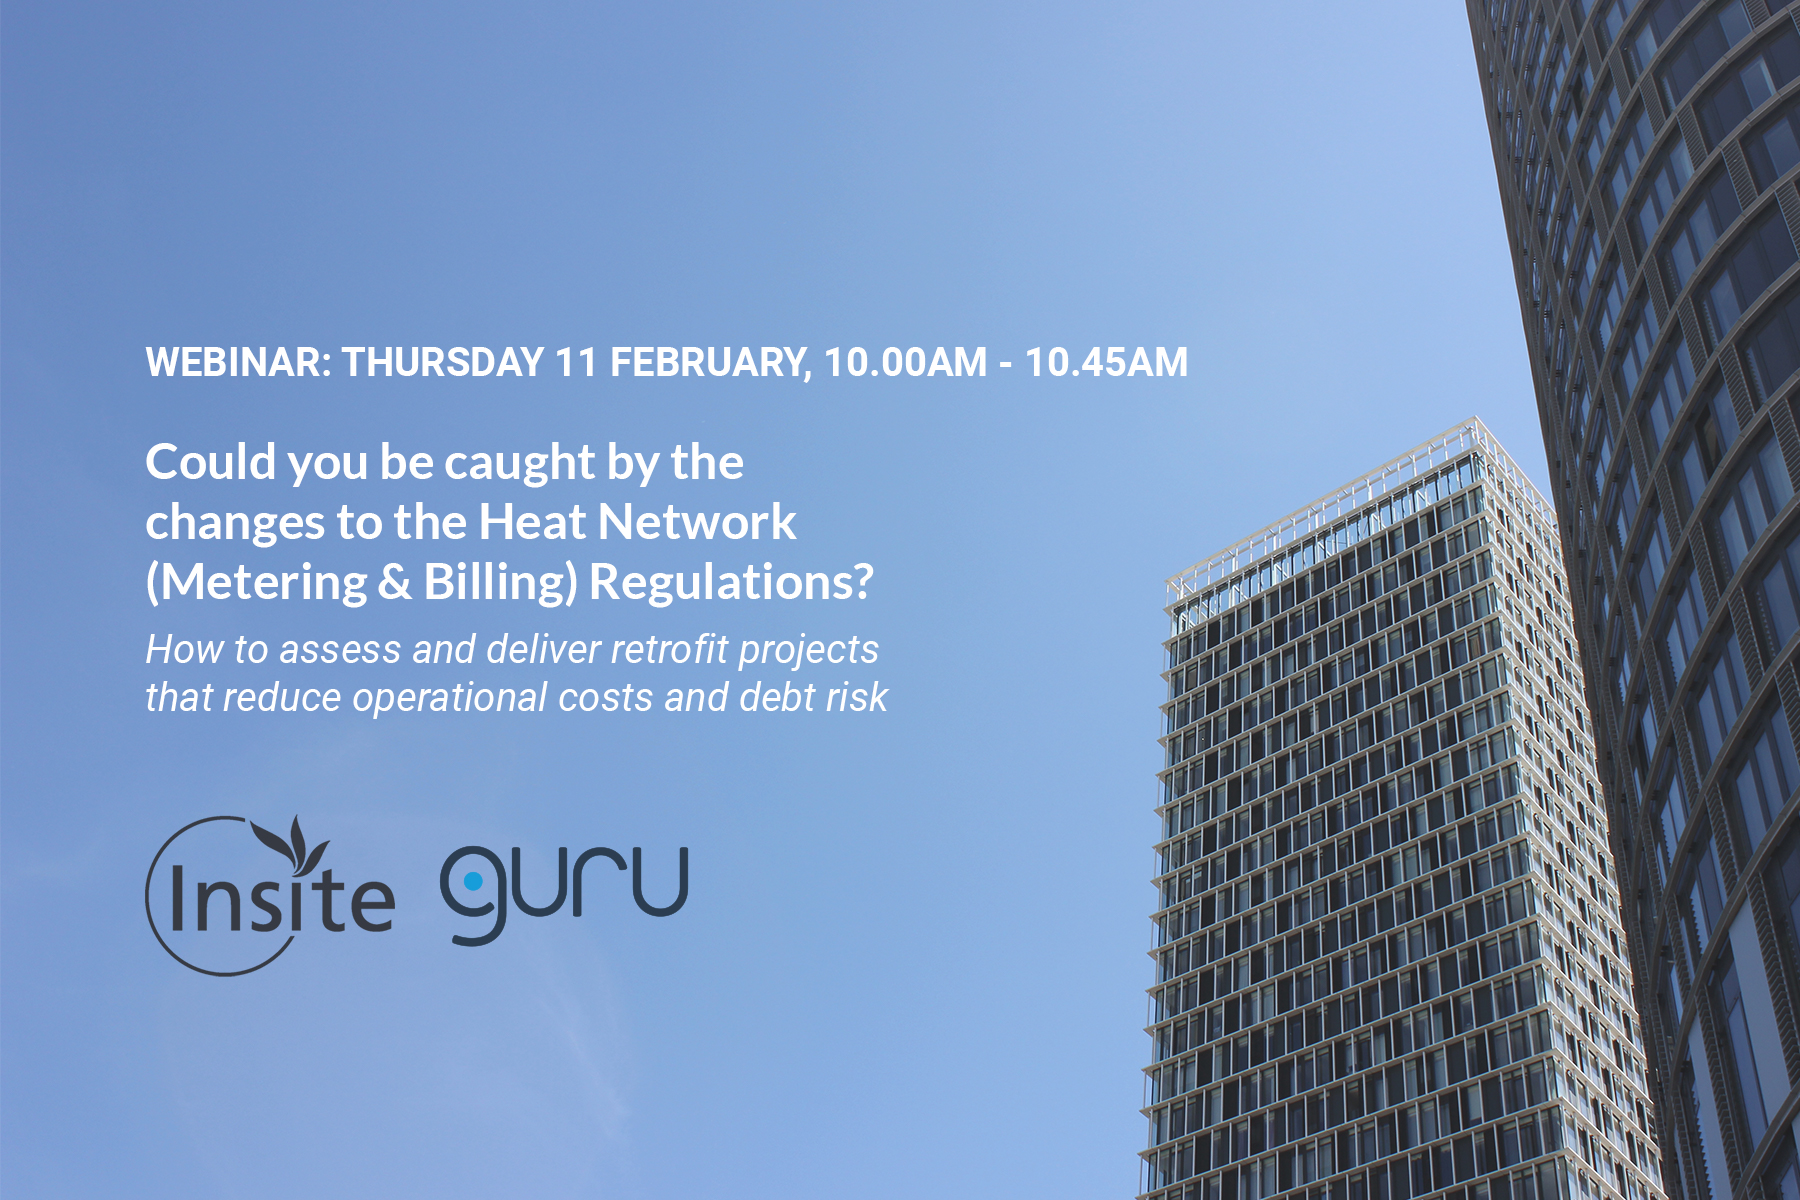 Webinar: Could you be caught by the changes to the Heat Network (M&B) Regulations?